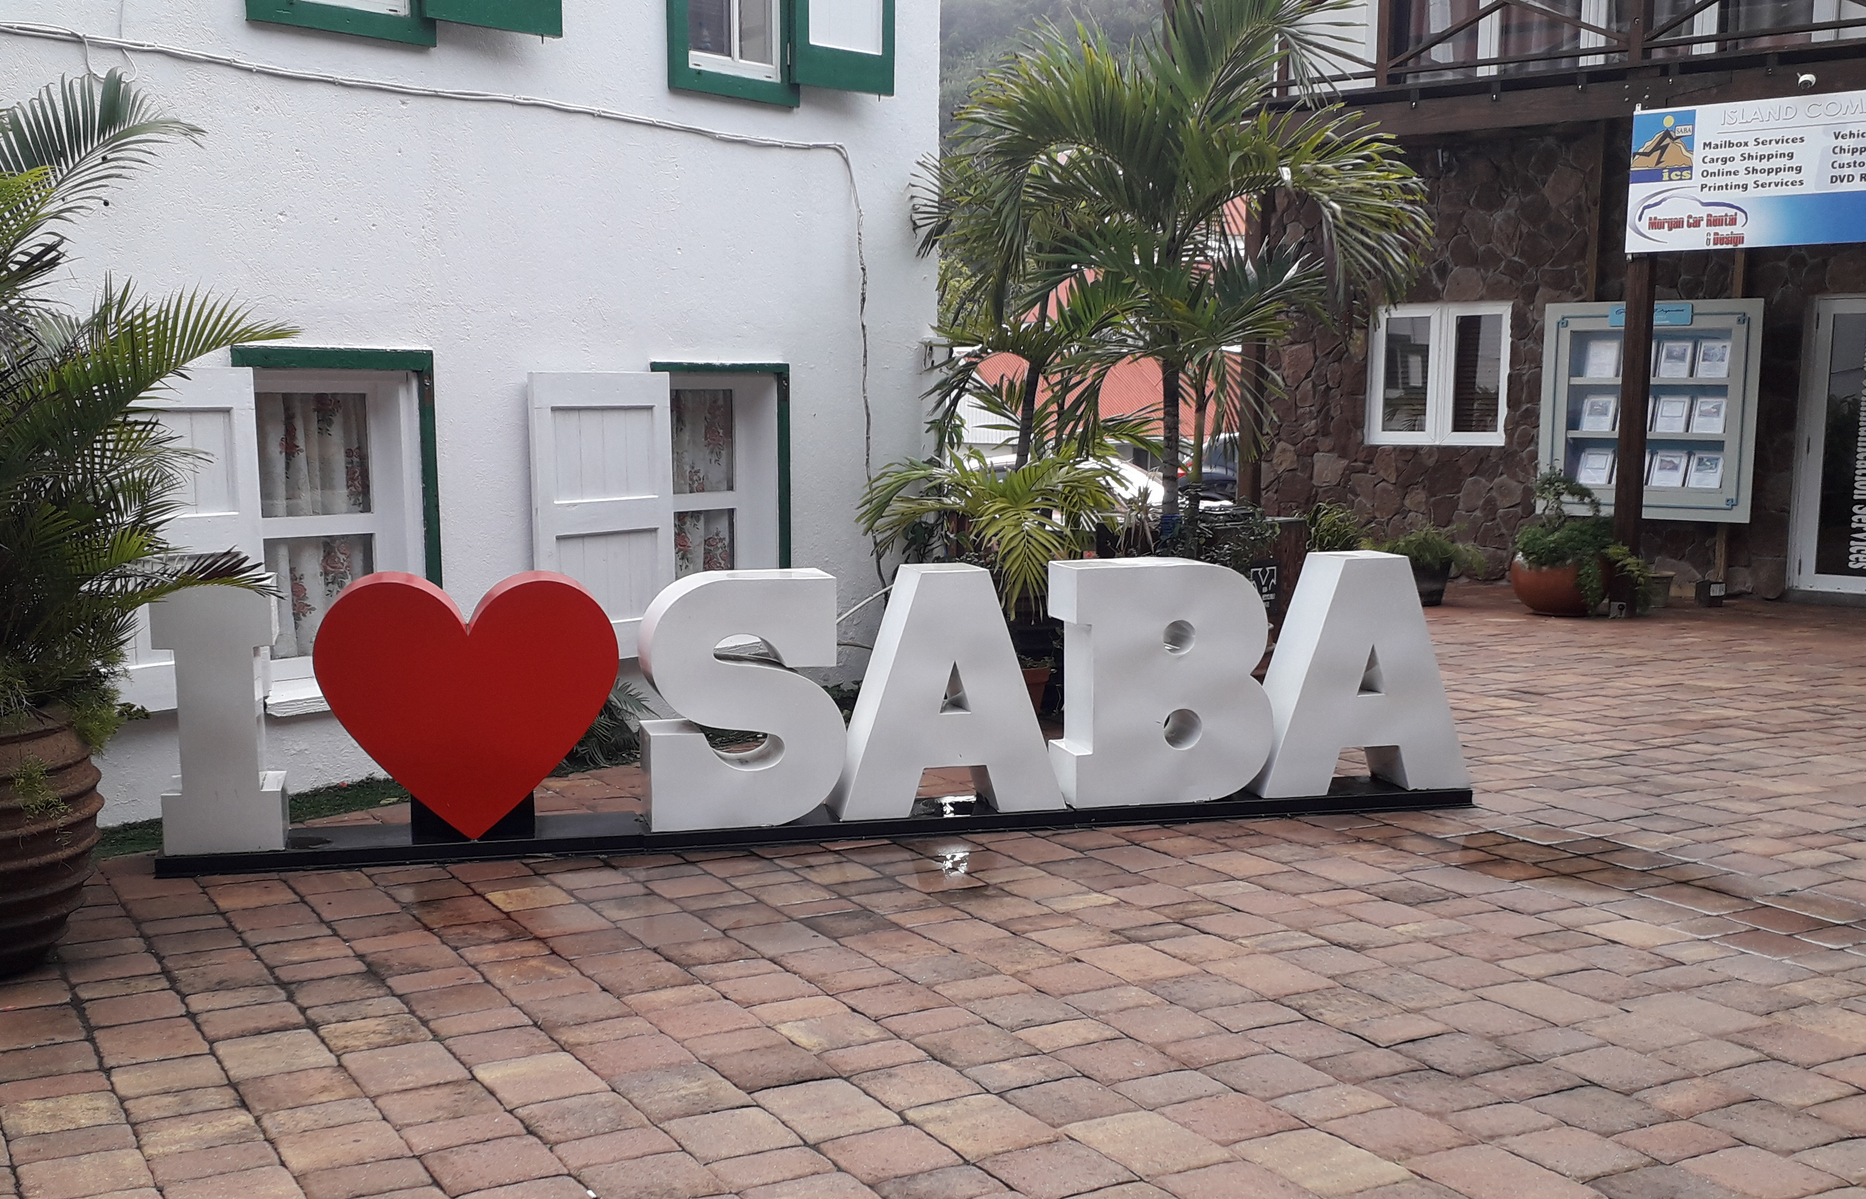 Saba Business Association wants expansion of Discretionary Fund